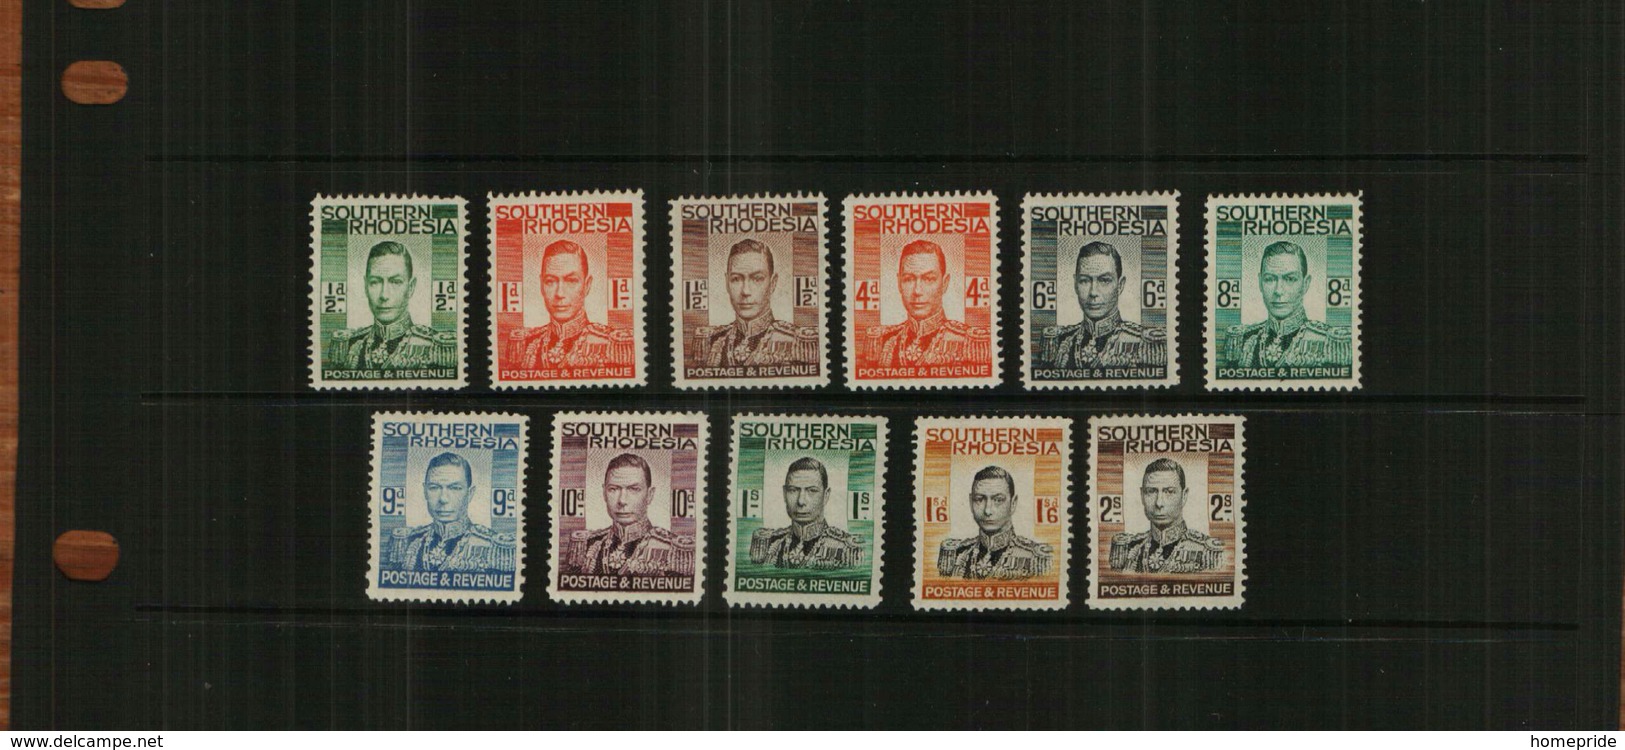 SOUTHERN RHODESIA - KGV1 - 1937- DEFS - 11 Stamps - MM - Africa (Other)